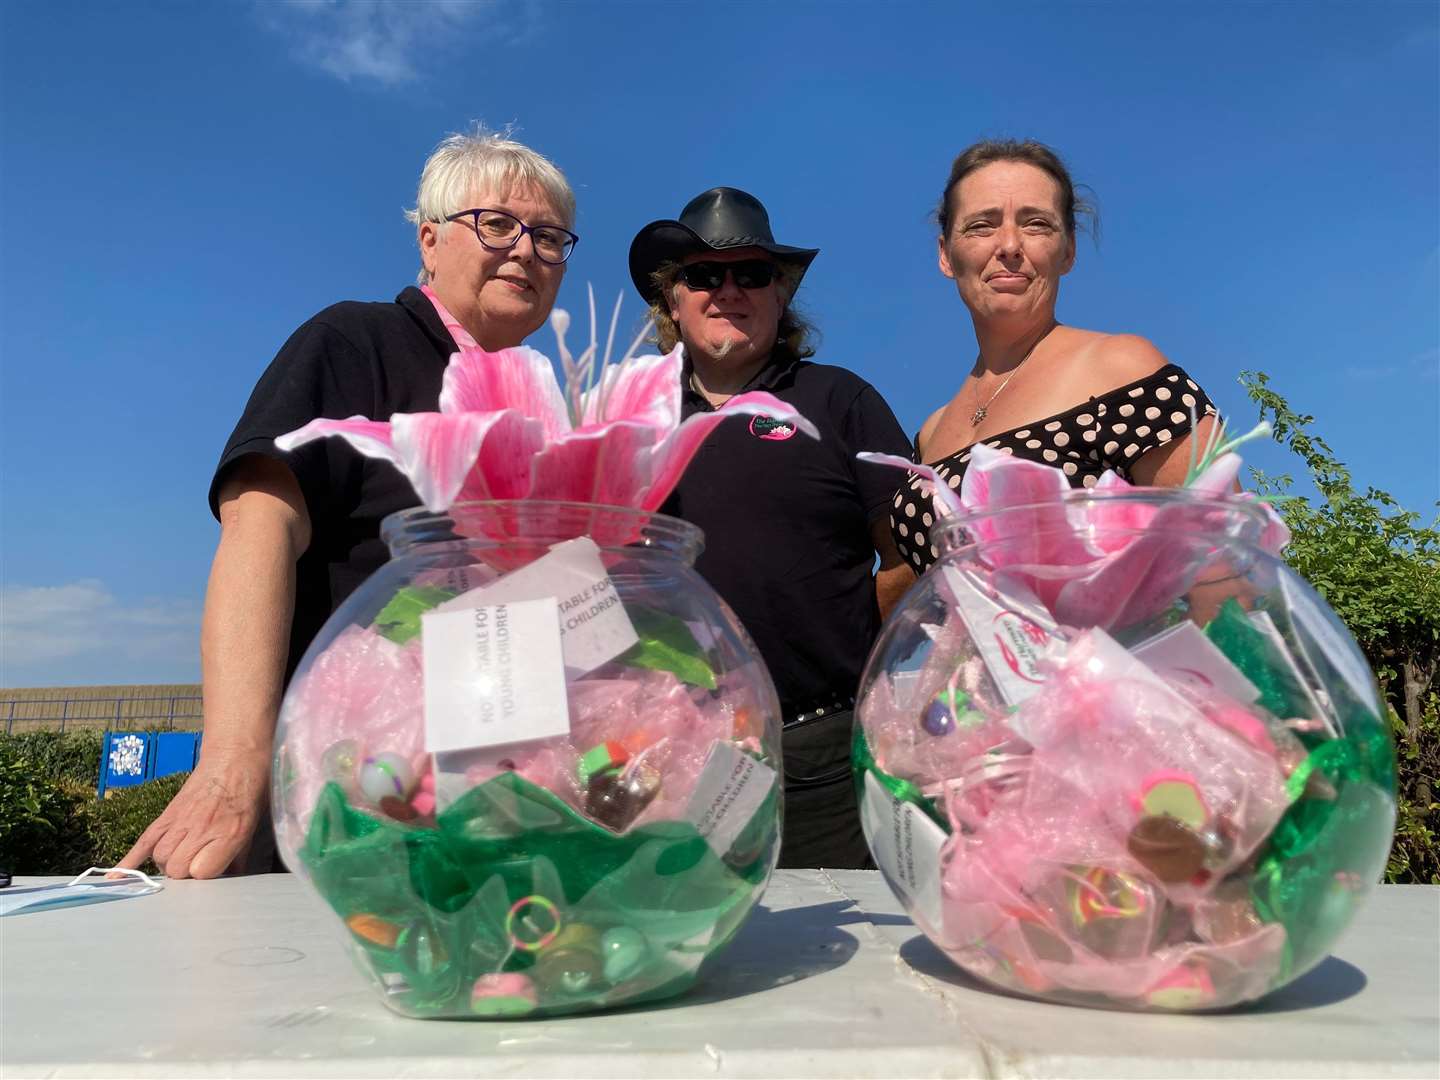 Wellbeing advice from the Harmony Therapy Trust was on offer at the Great Big Green Week event at Beachfields seafront park, Sheerness. Picture shows founder Dawn Cockburn, left, with volunteers Tony Stubley and Kelly Smith in front of glass globes containing the £1 Harmony Happiness Kits